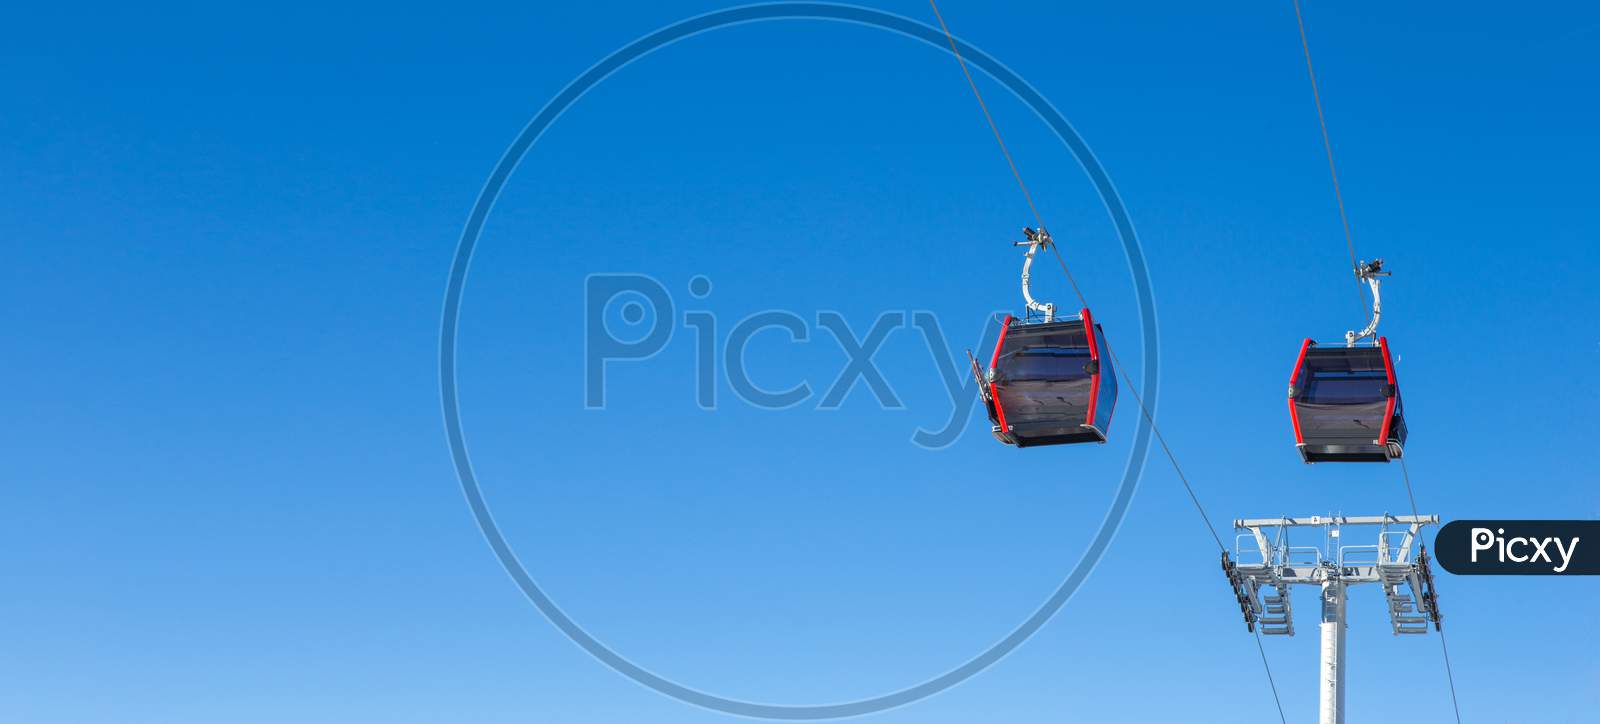 A Brand New Cable Car Is In Use. View Of Two Gondolas And Behind Them Is Clear Blue Sky. It'S A Beautiful Sunny Day On The Mountain.